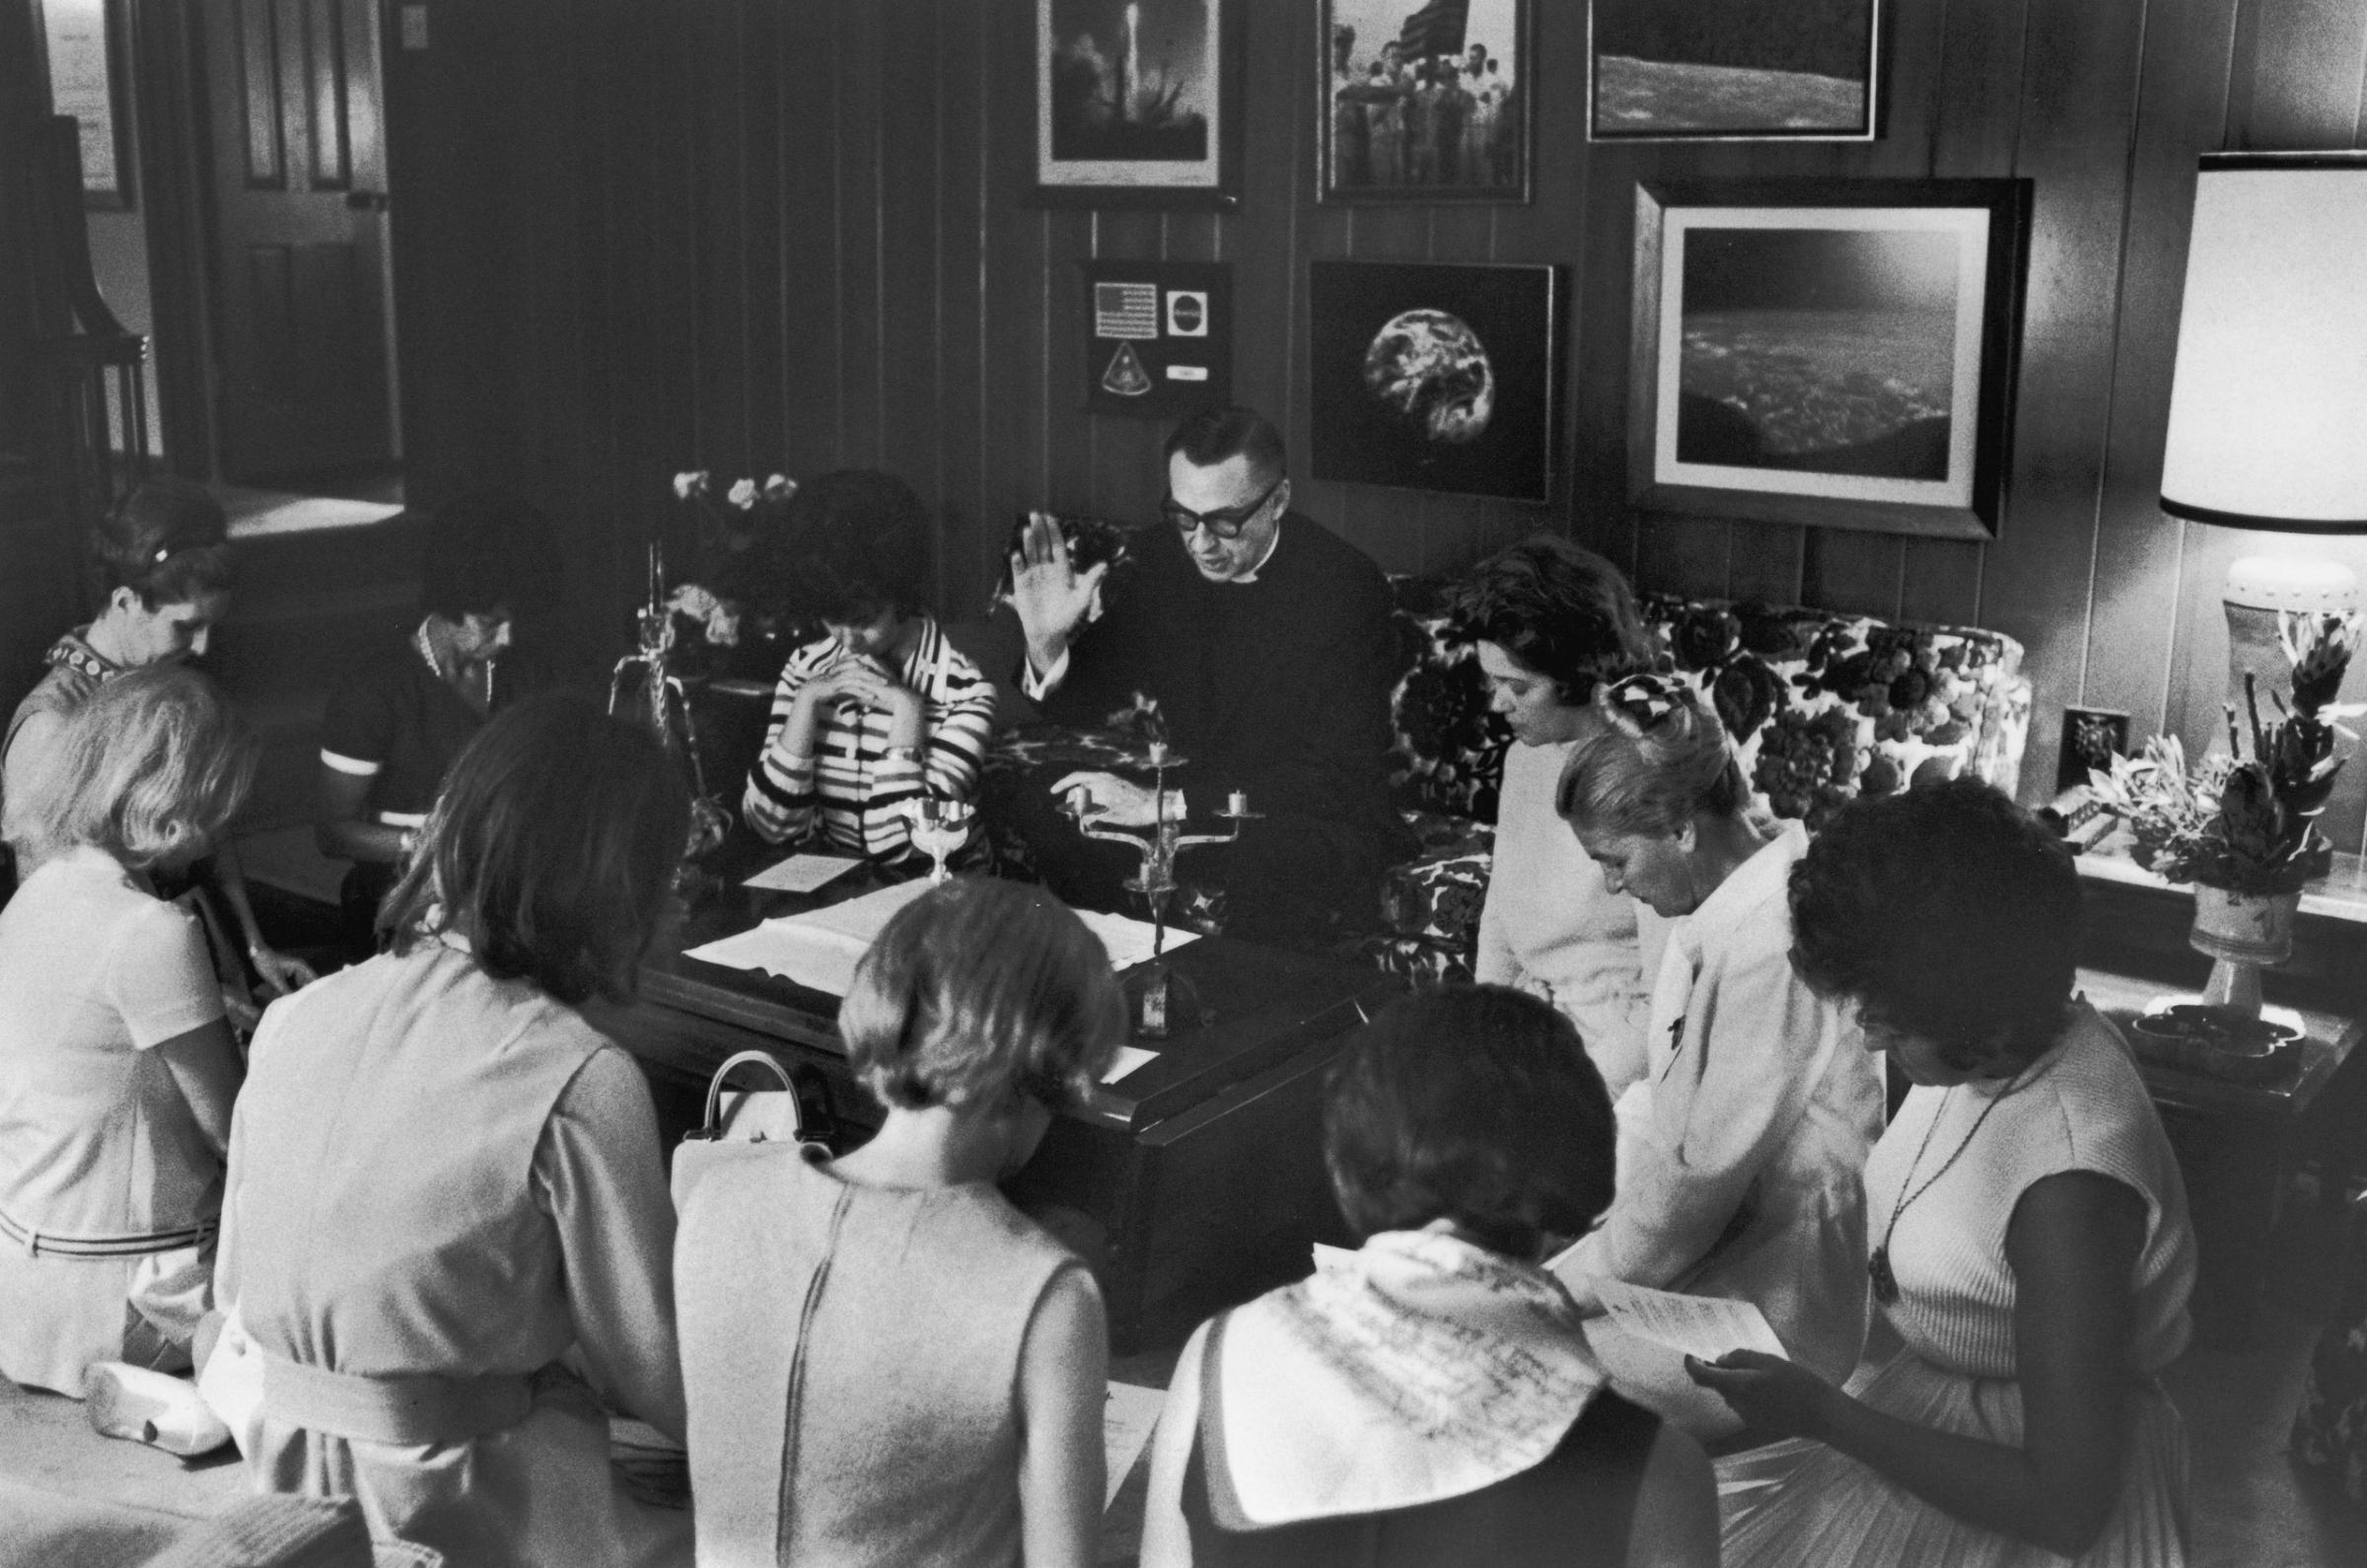 Father Donald Raish (center) holds a private service at the Lovell home during the Apollo 13 crisis, April 1970.